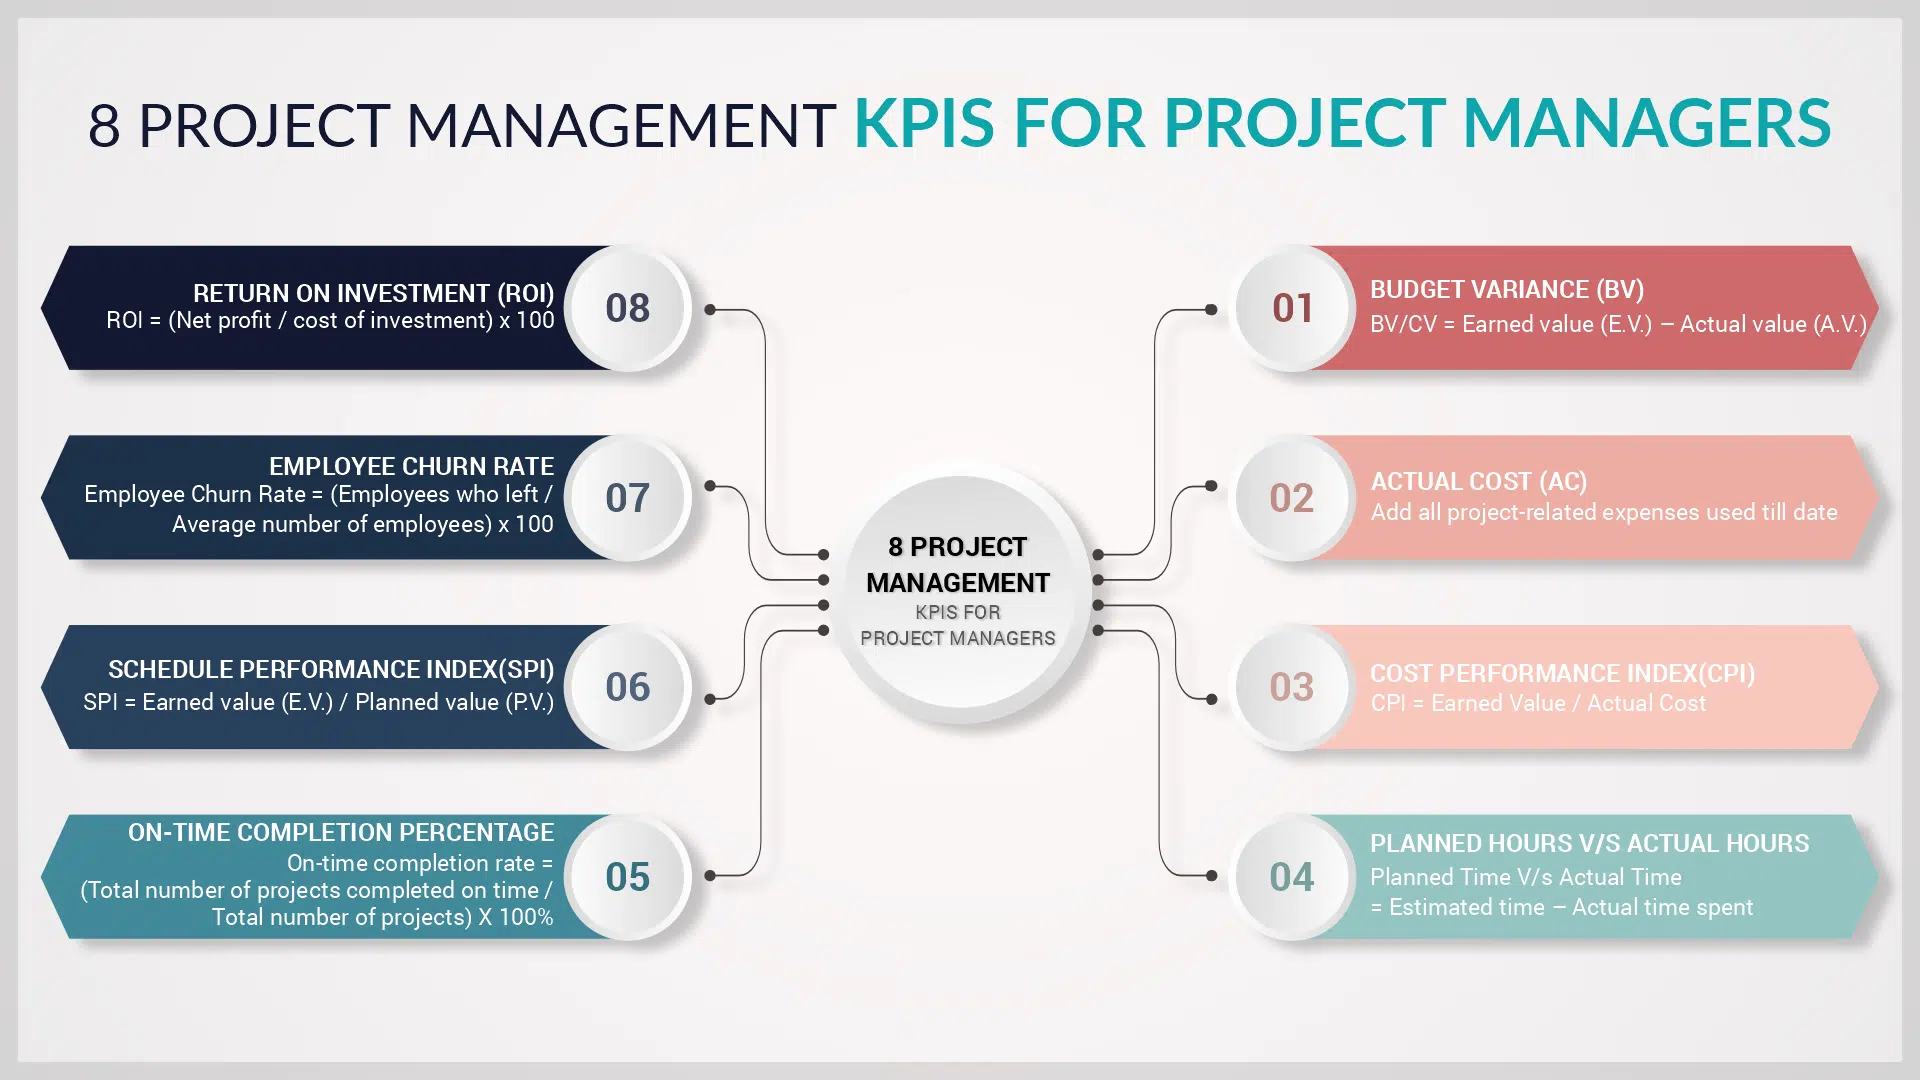 8 Important Project Management KPIs For Project Managers